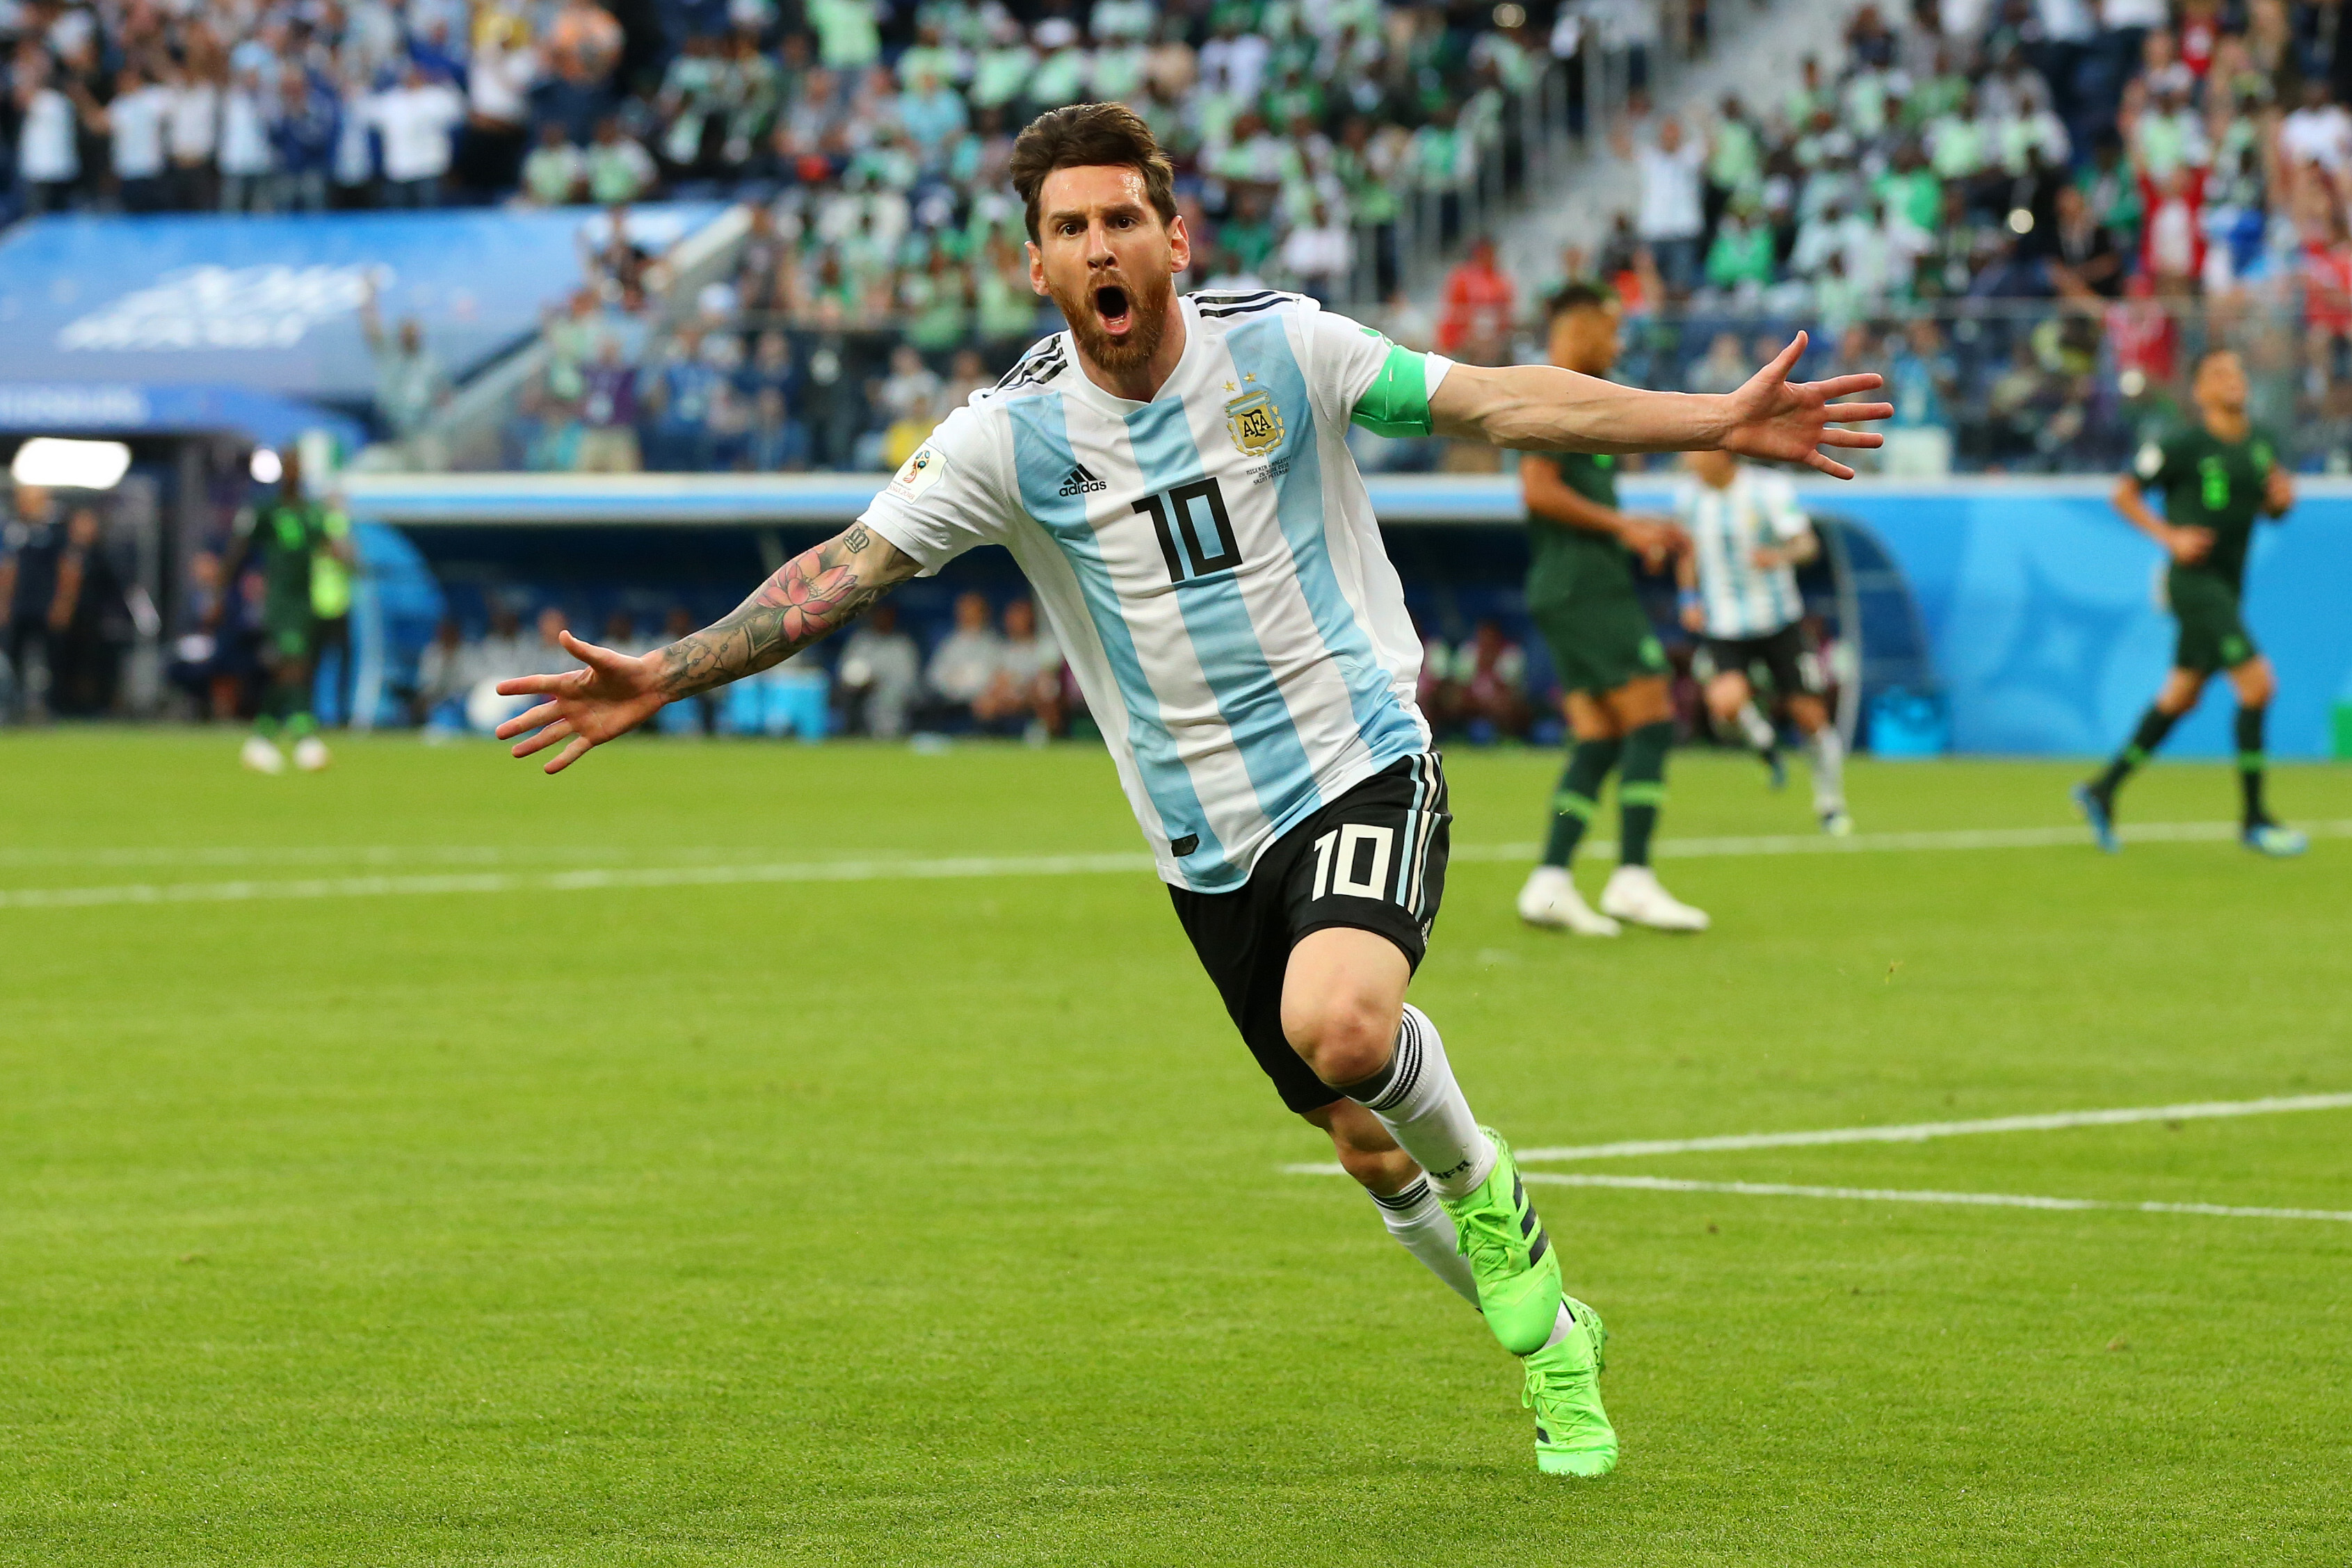 Lionel Messi In Fifa 2018 World Cup Wallpaper Hd Sports 4k Wallpapers Images And Background